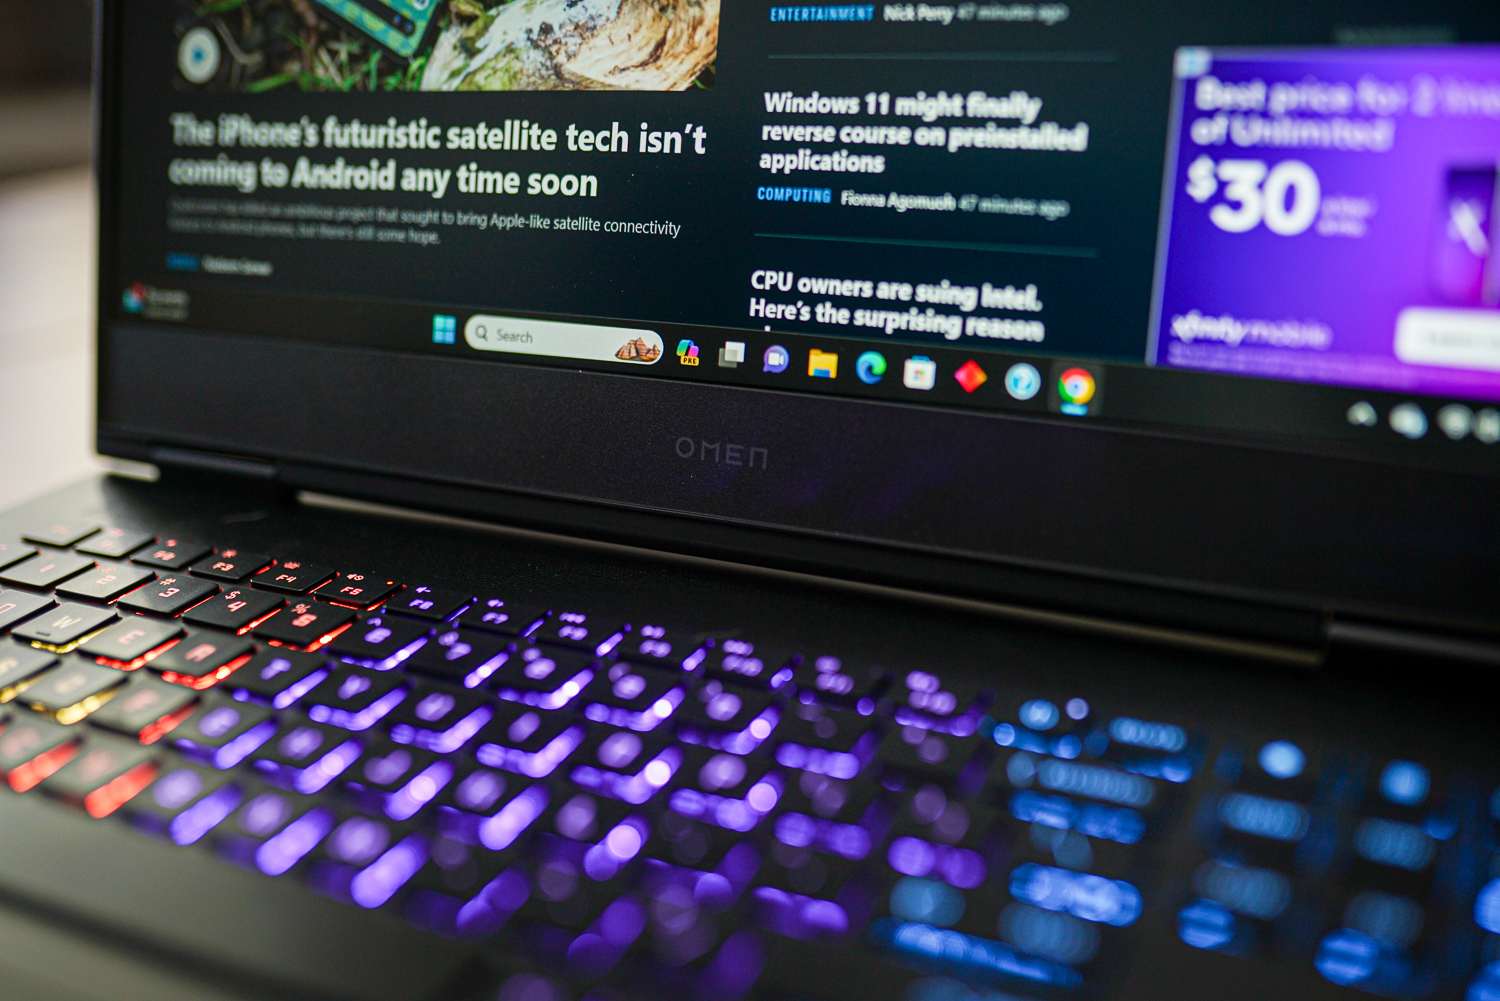 HP Omen 17 Review: A Value-Priced Mobile Gaming Beast